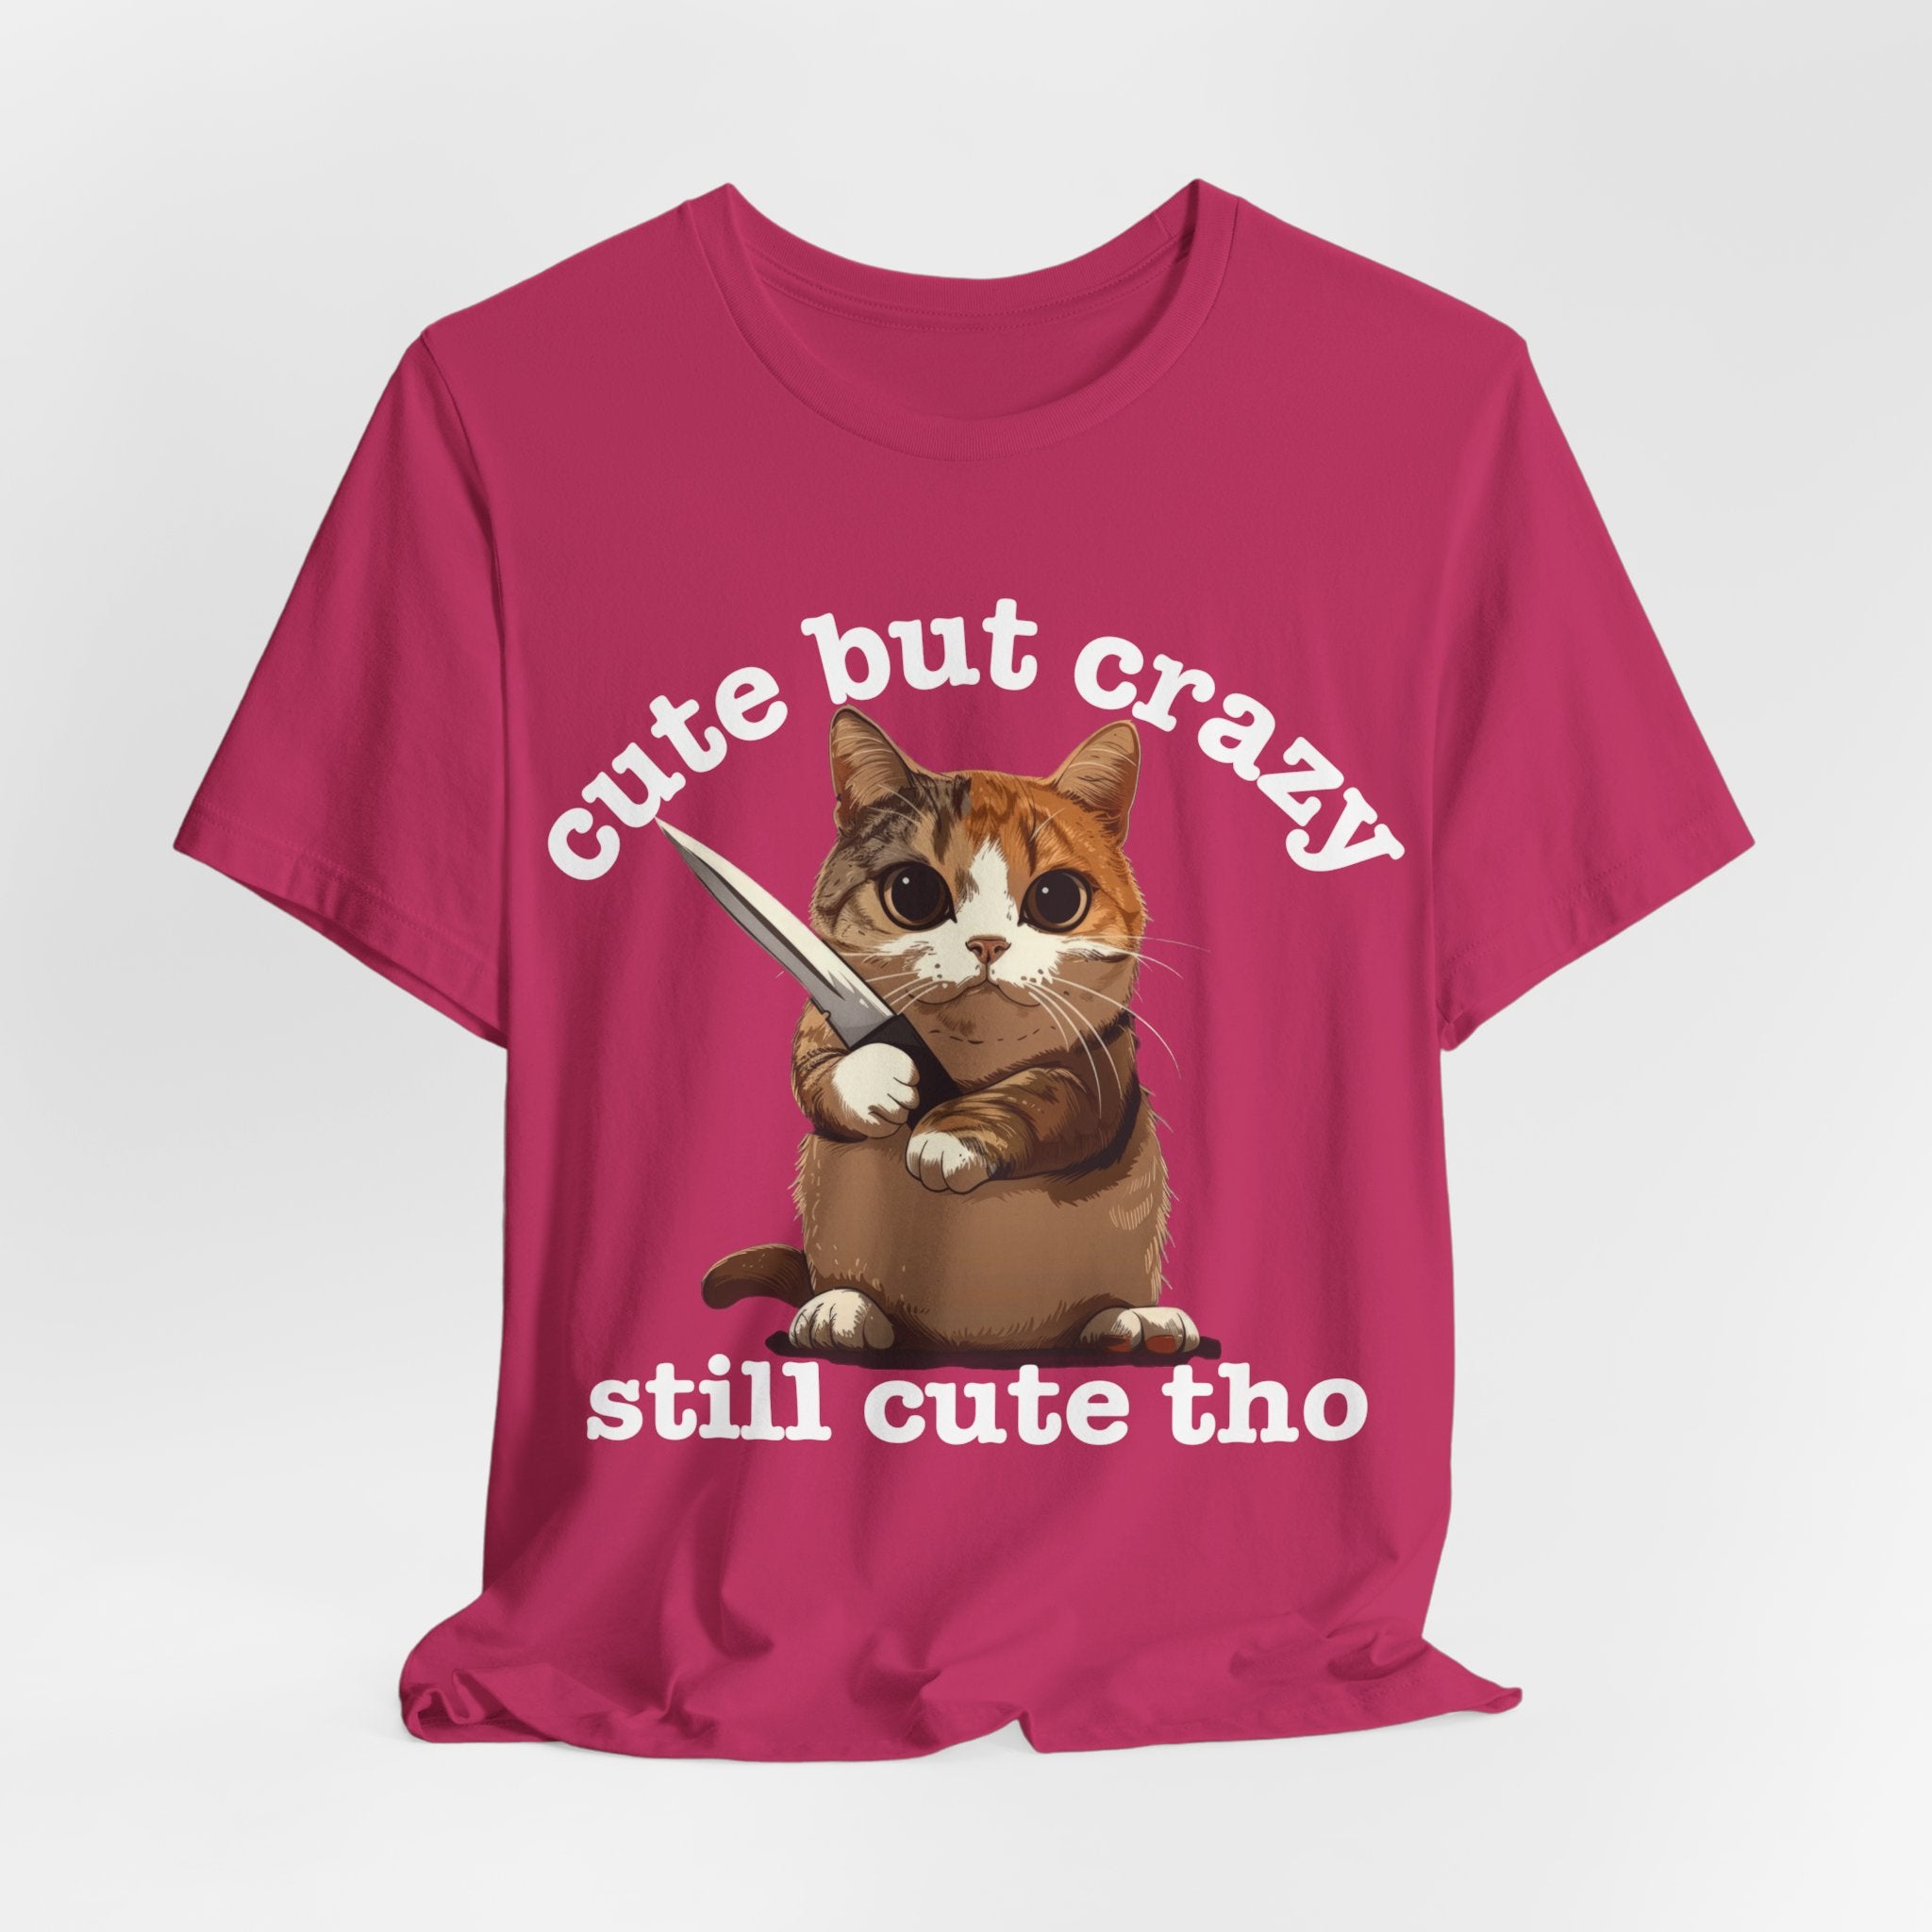 Funny Cat T-Shirt - 'Cute but Crazy, Still Cute Tho' - Whimsical Cat Lover Tee - Perfect Gift for Pet Owners